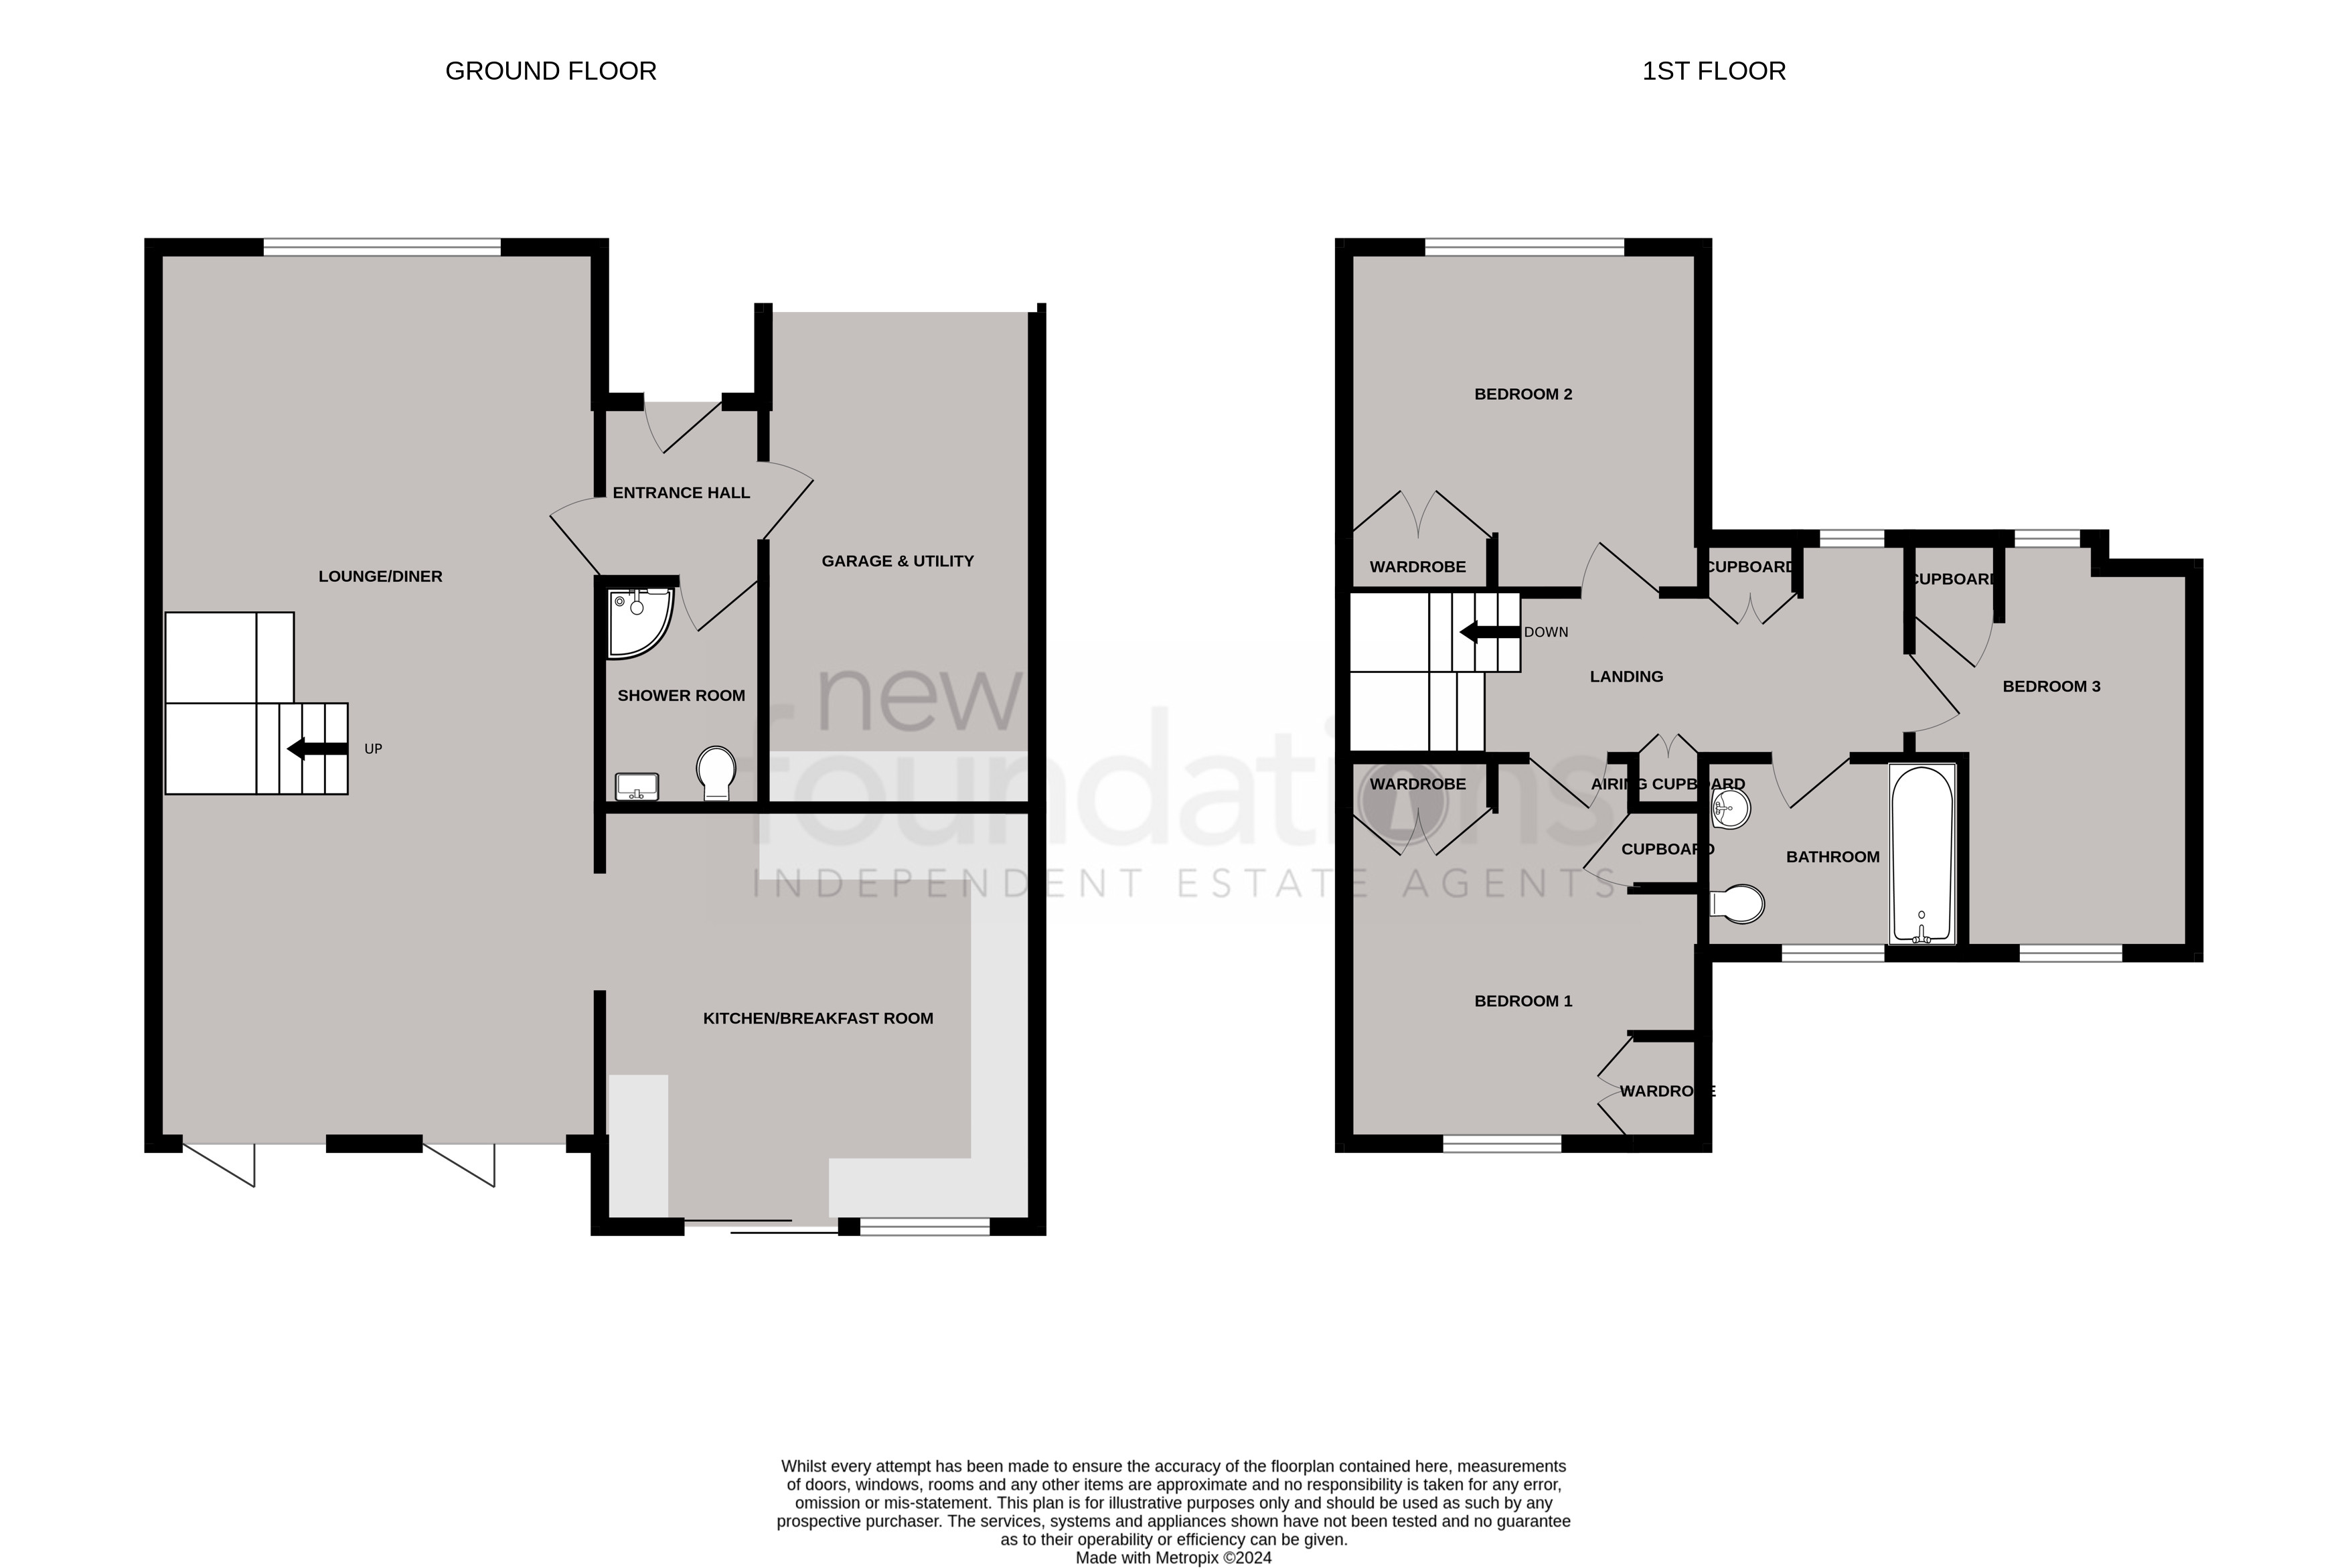 Floorplans For The Ridings, Bexhill-on-Sea, East Sussex